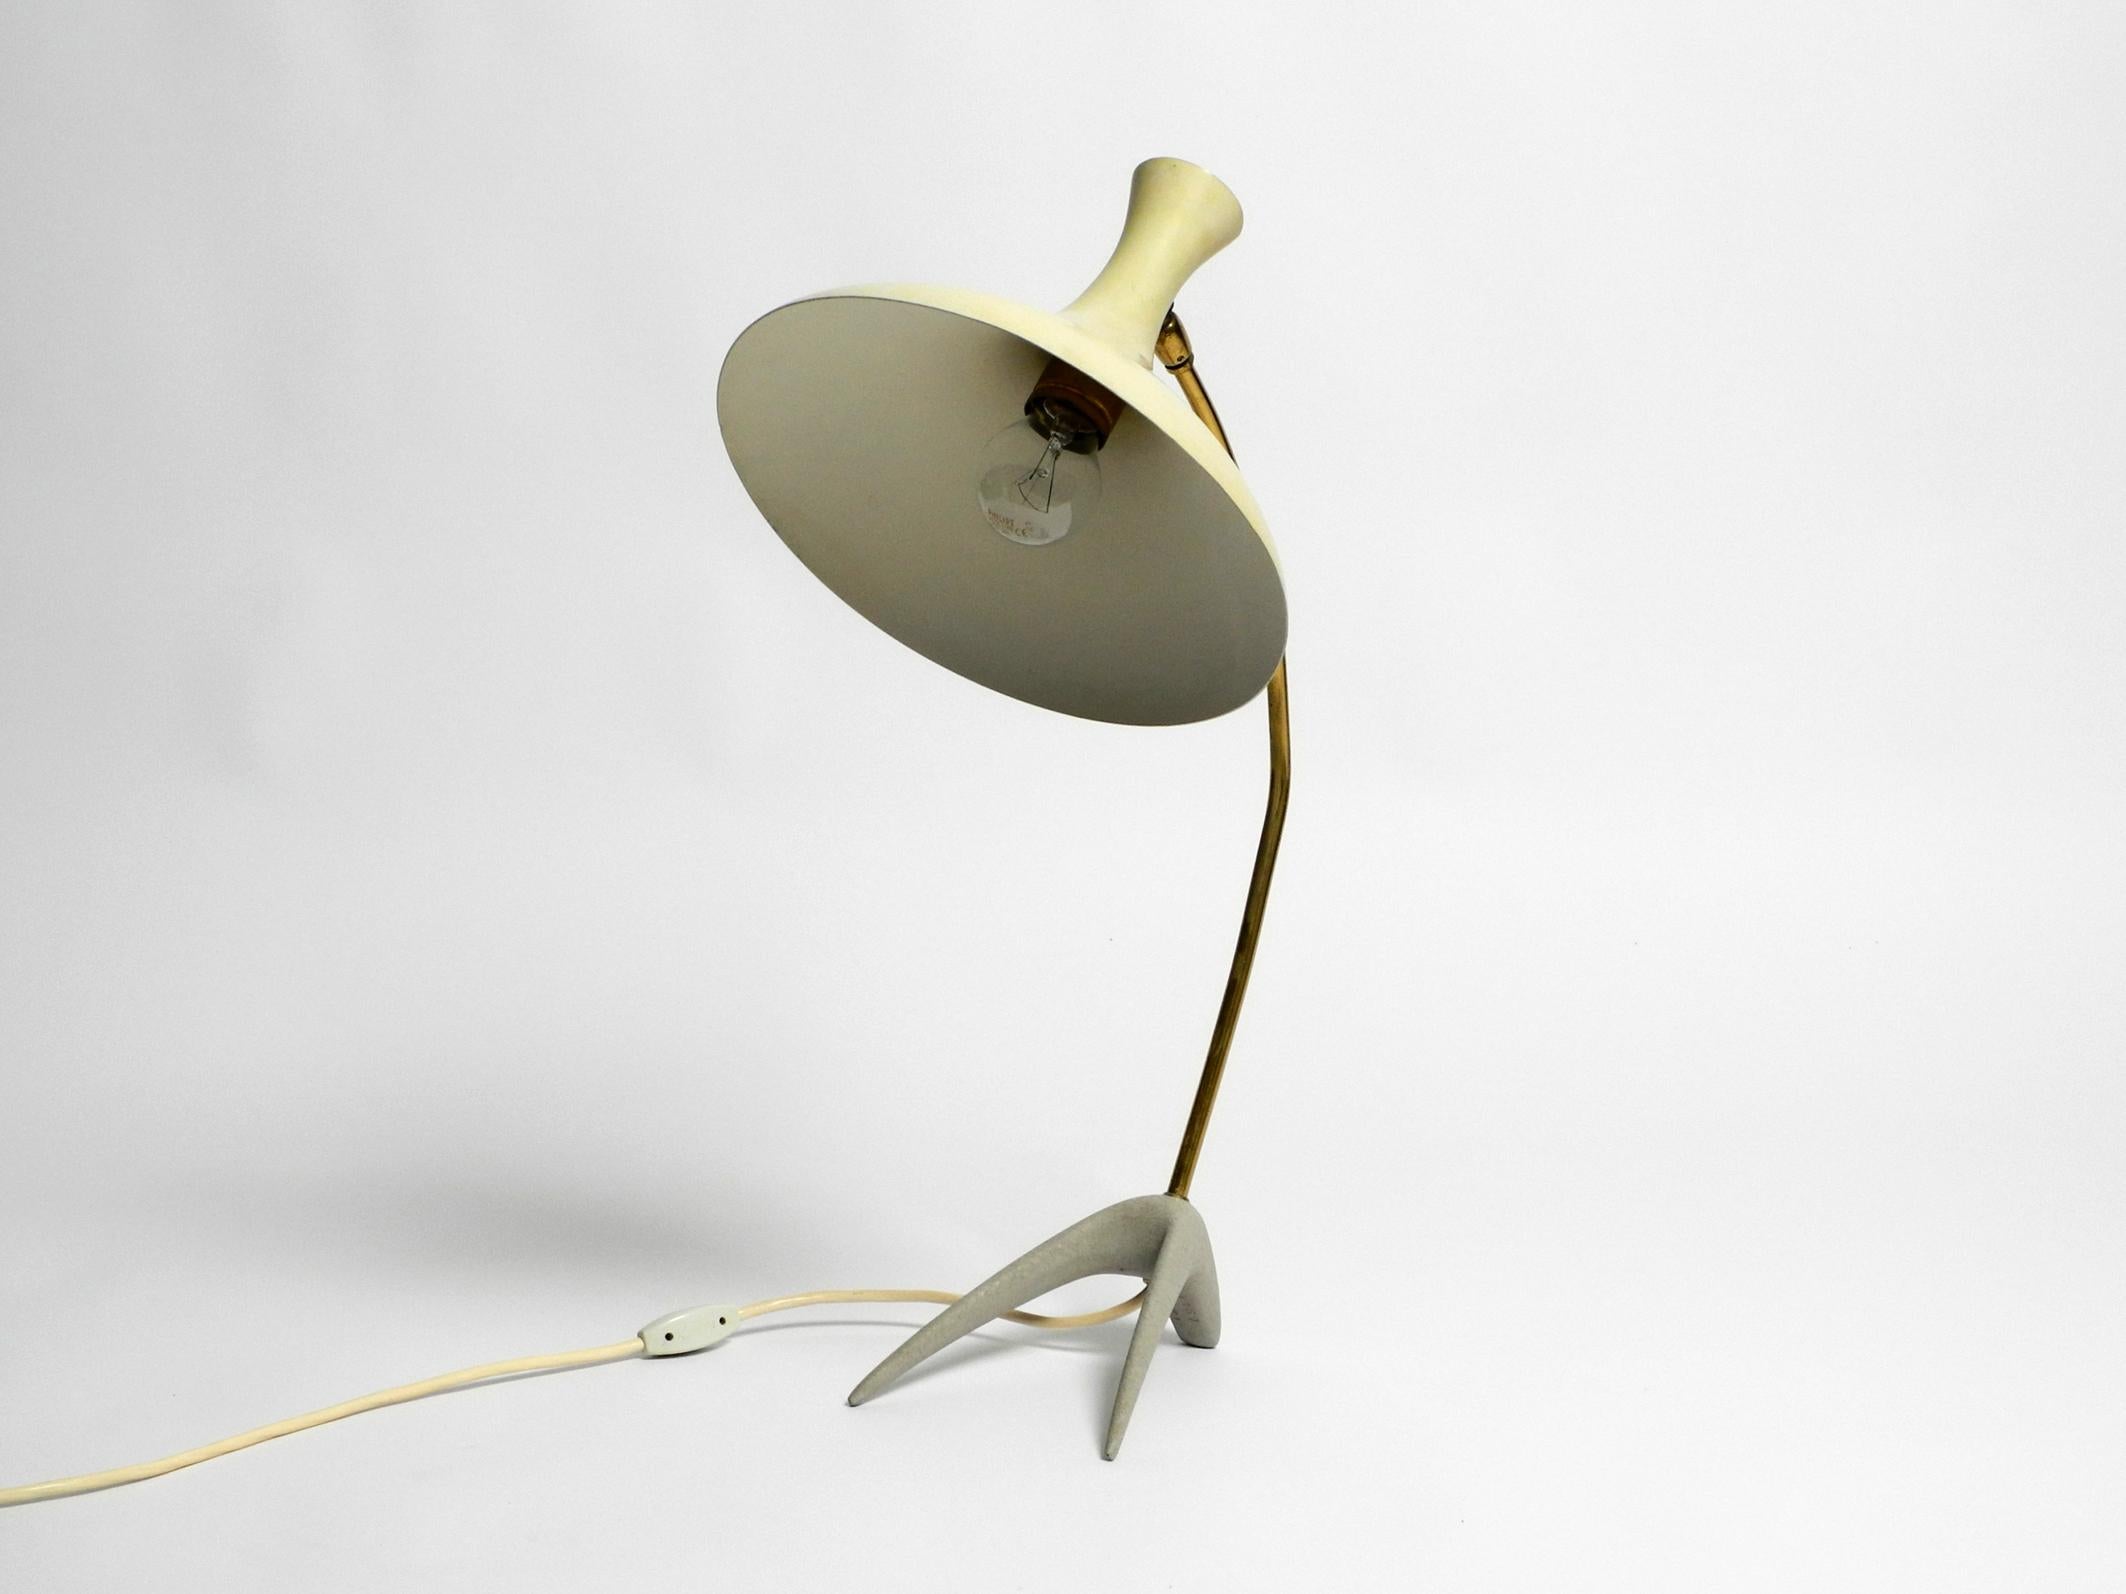 Rare large Mid Century Modern crow's foot table lamp by Karl Heinz Kinsky for Cosack.
Beautiful design with adjustable lampshade in original condition.
This is the largest version of this lamp with a maximum height of 58cm.
Yellow aluminum